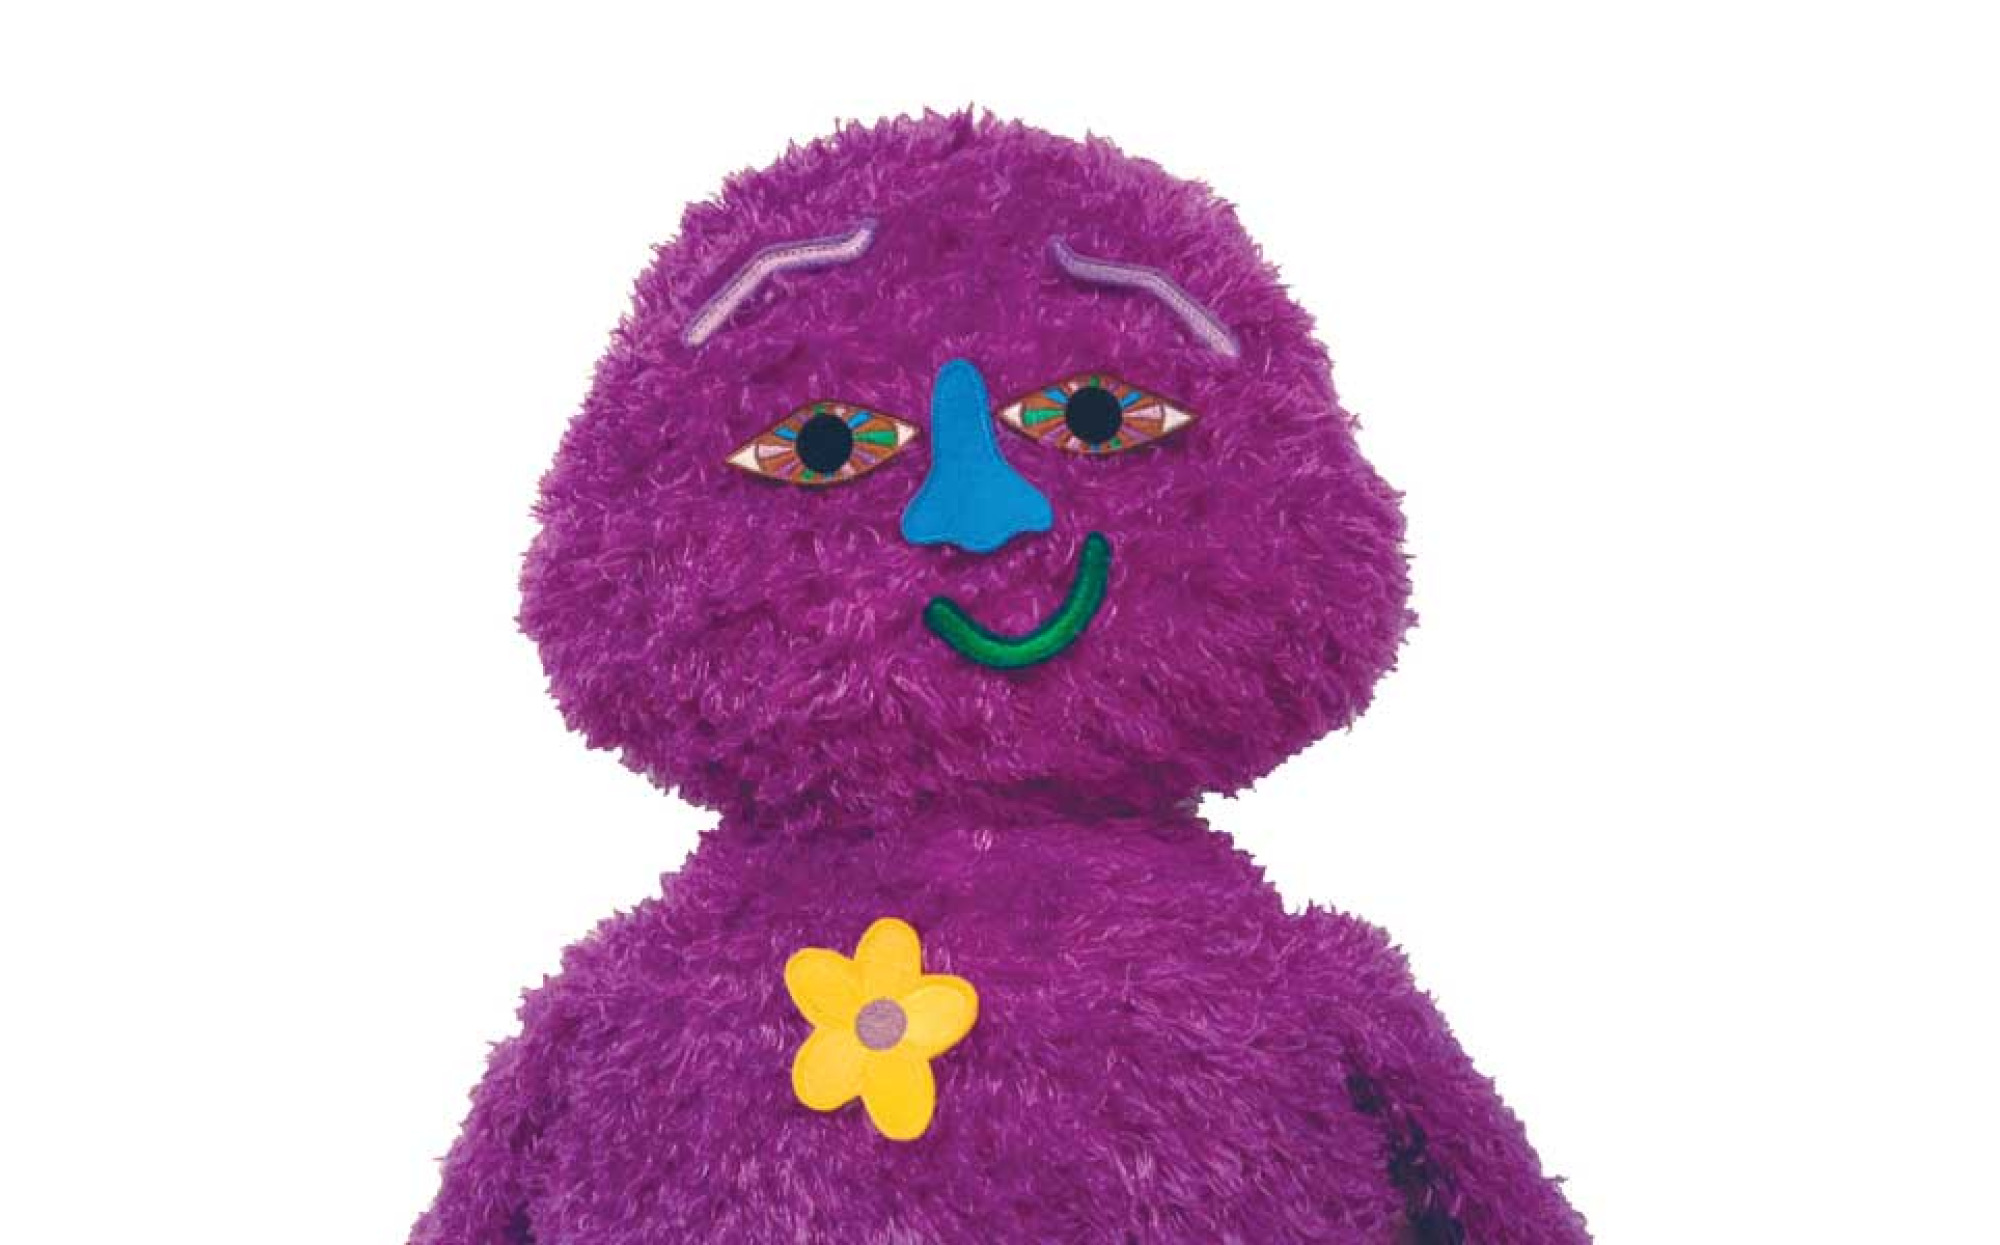 meebie therapy doll